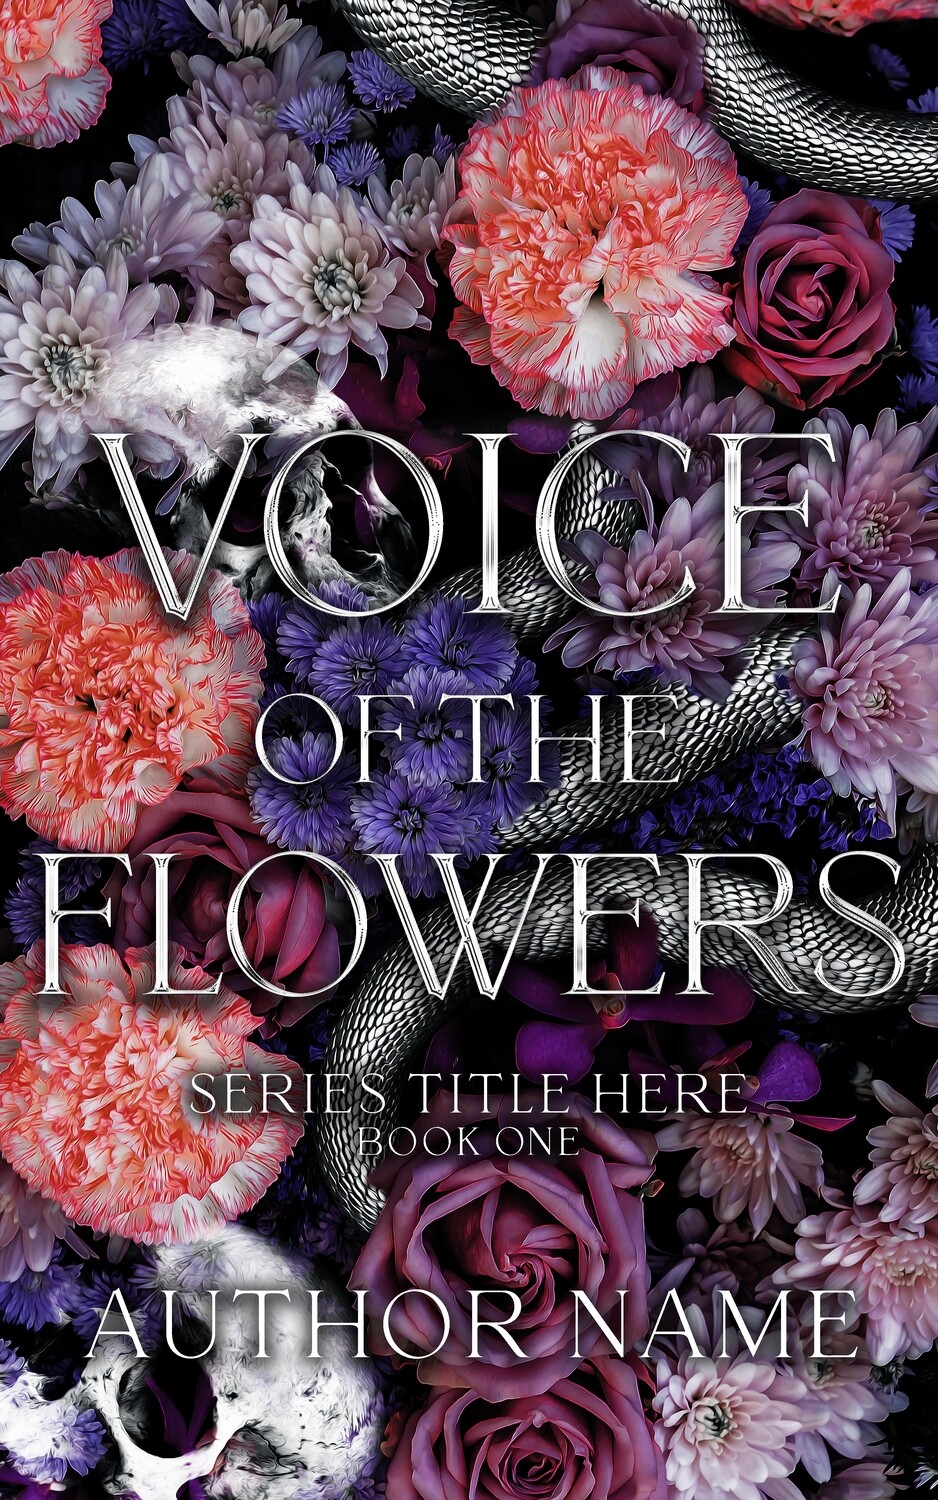 VOICE OF THE FLOWERS